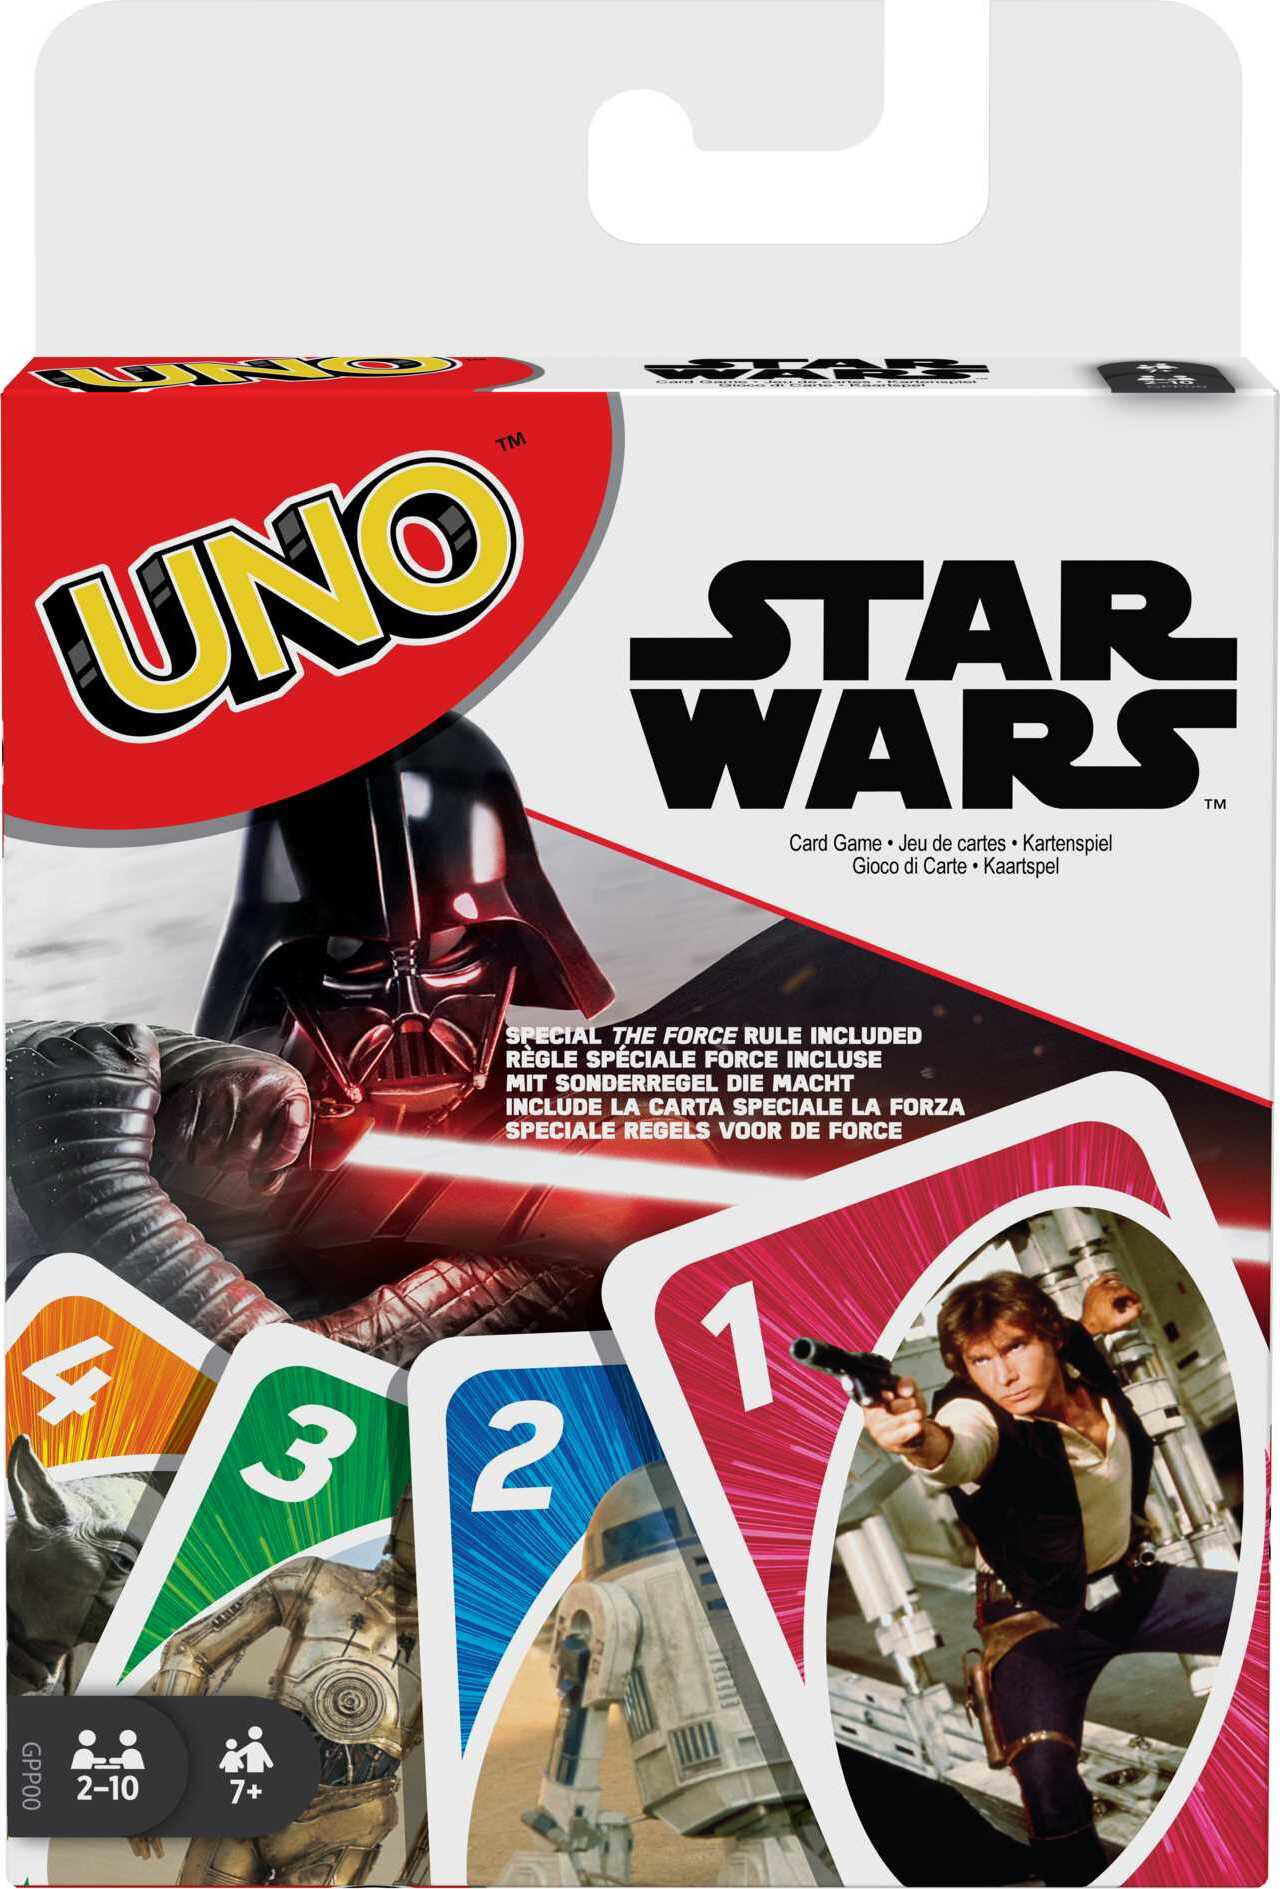 UNO Star Wars Card Game for Kids & Family, 2-10 Players, Ages 7 Years & Older - image 1 of 3